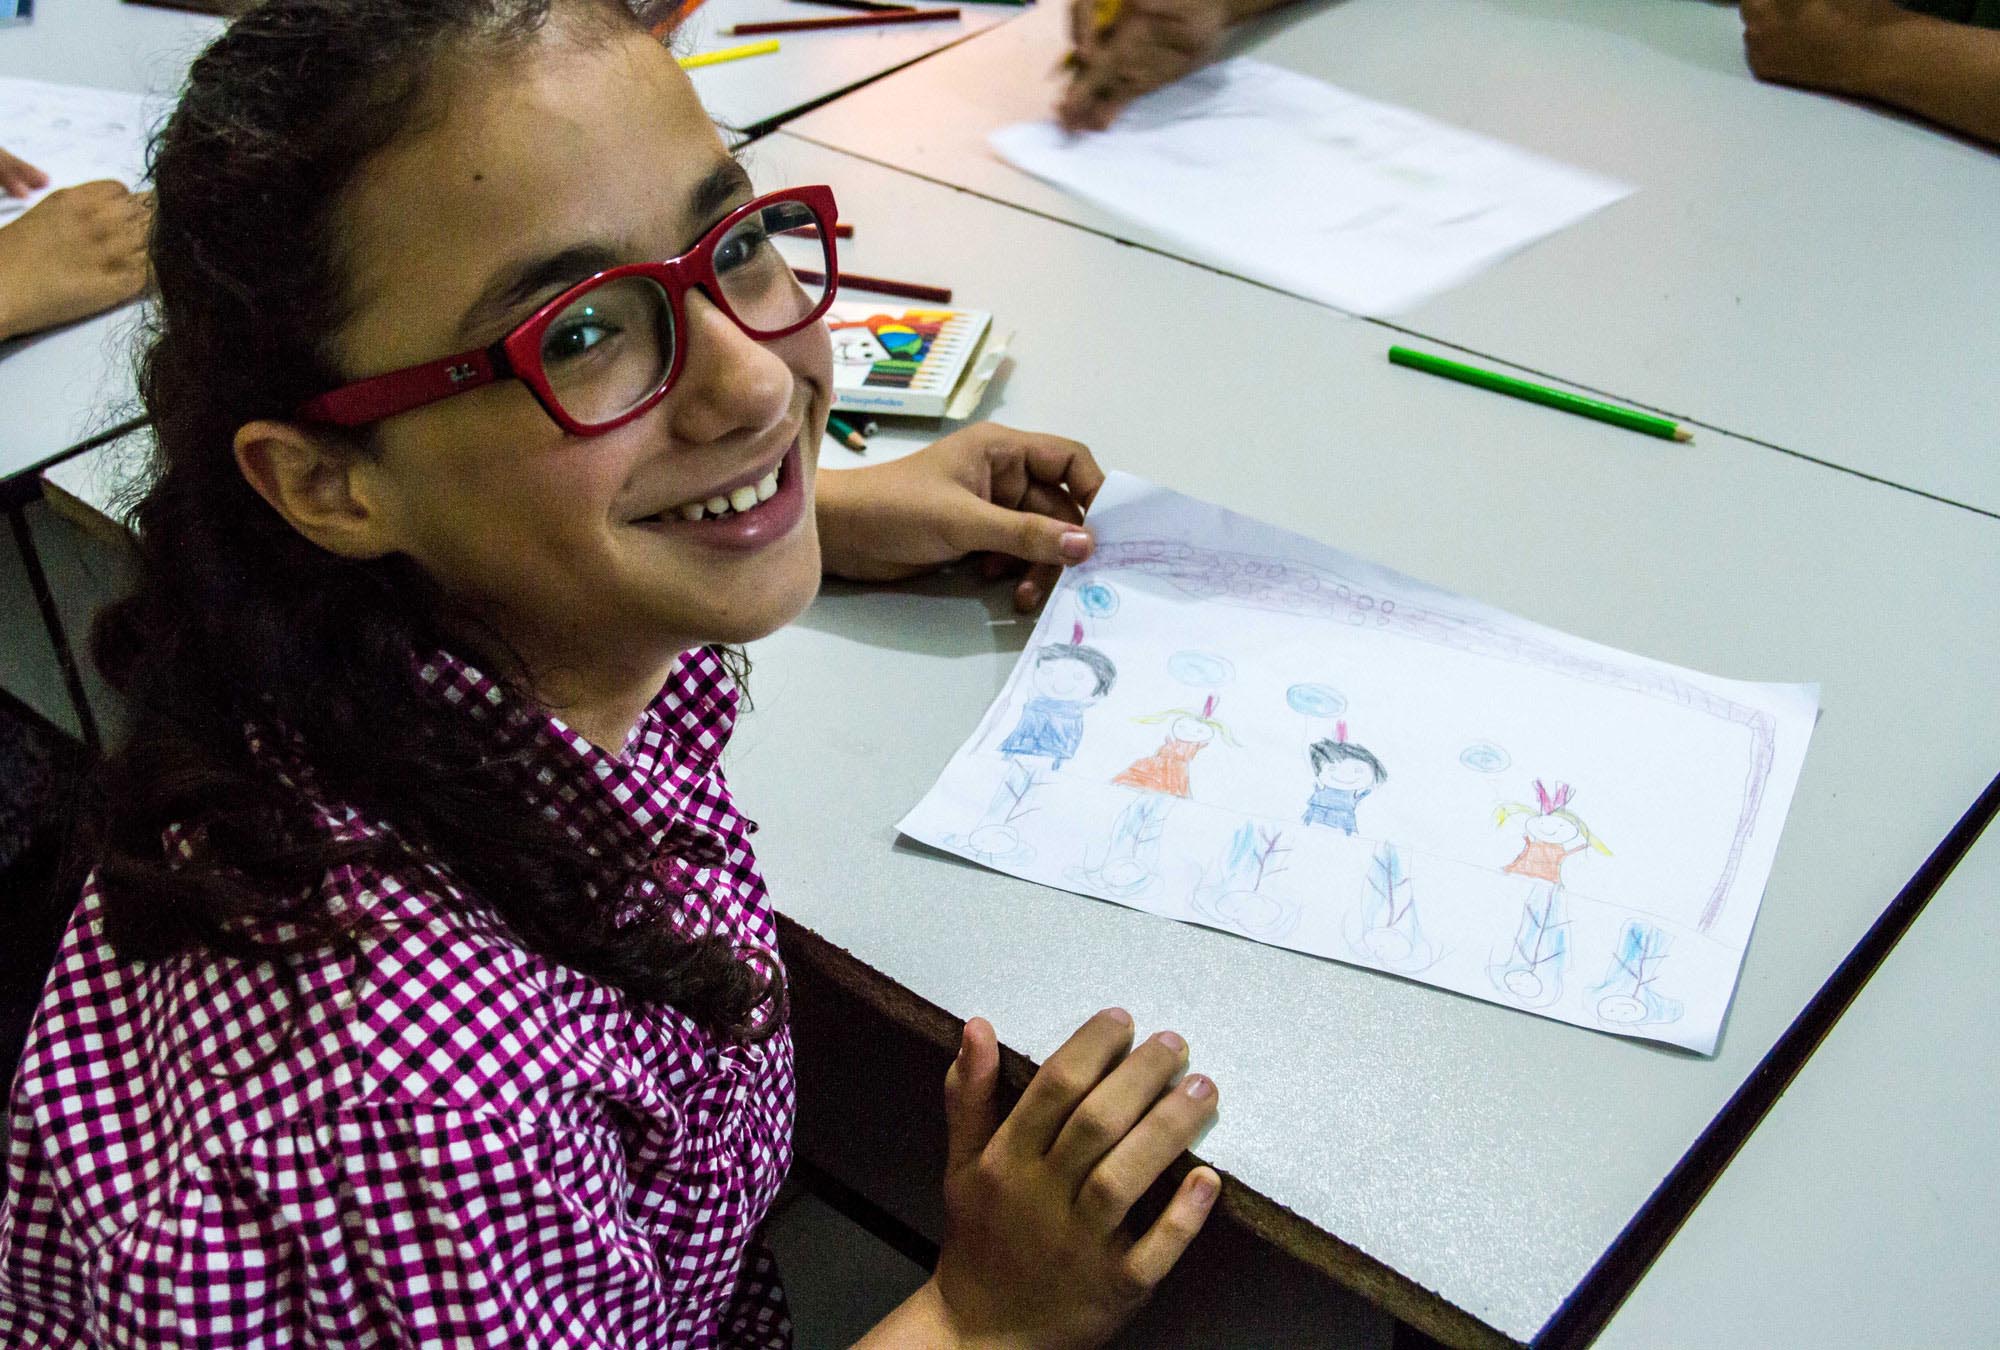 Dalal from the Shatila Palestinian refugee camp in Beirut draws pictures from her trip to the circus.